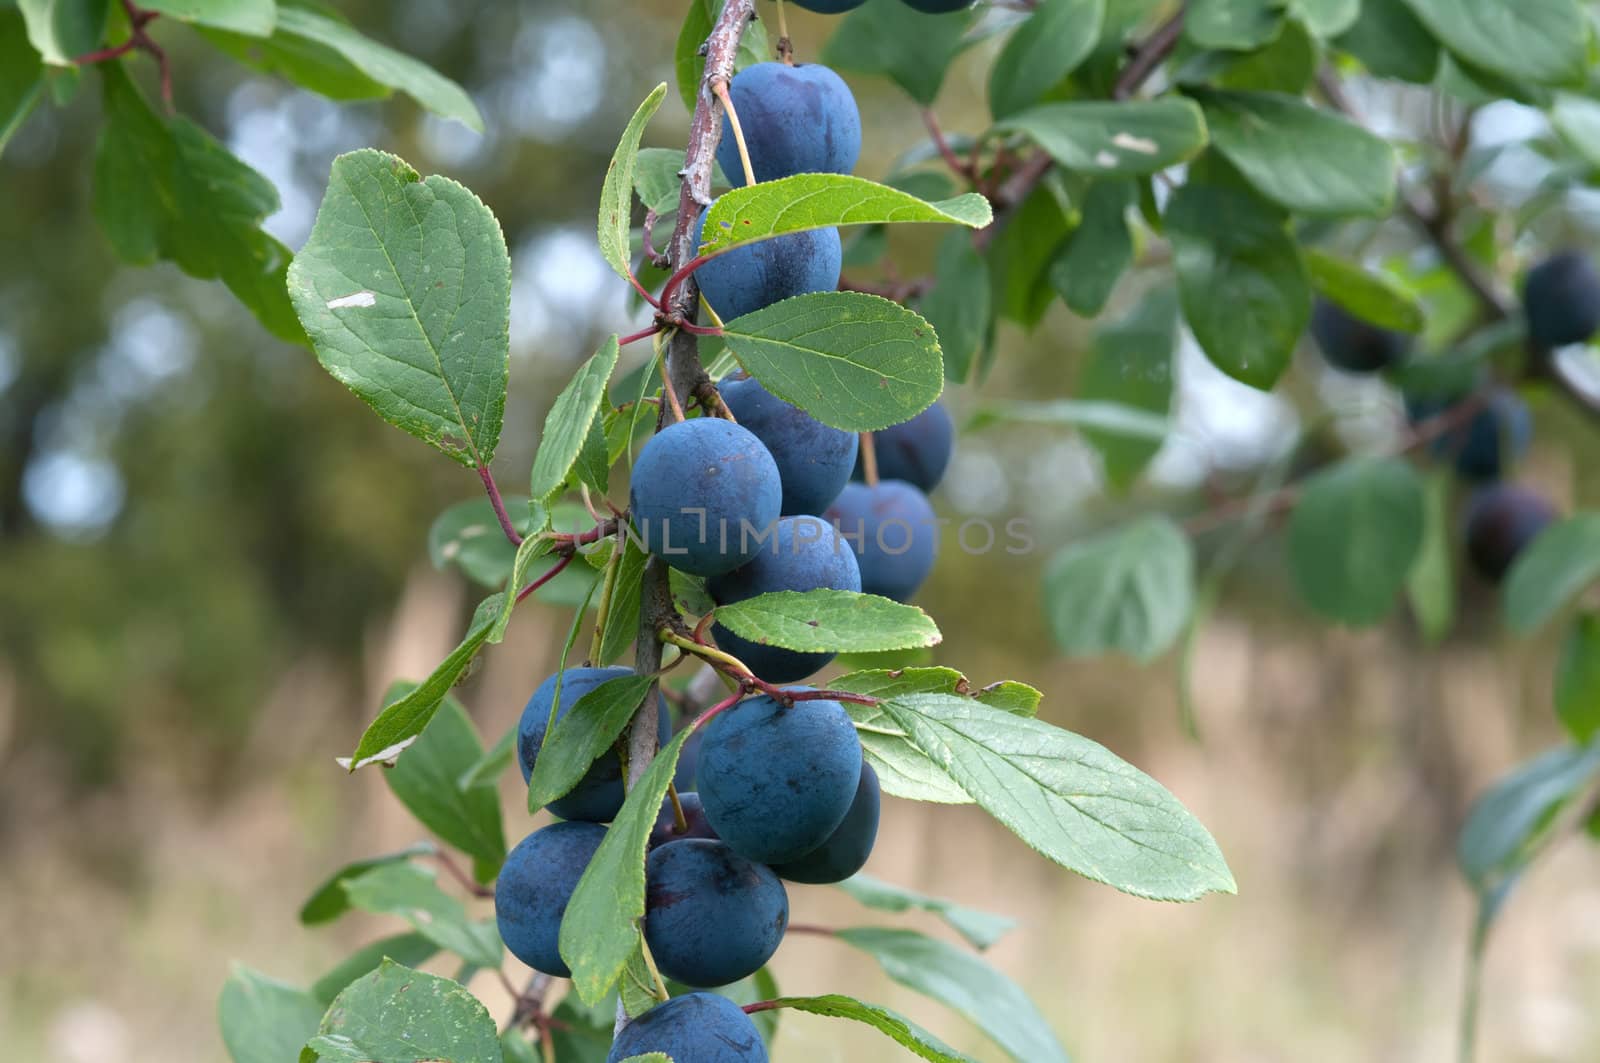 Ripe berries of a sloe on branches.